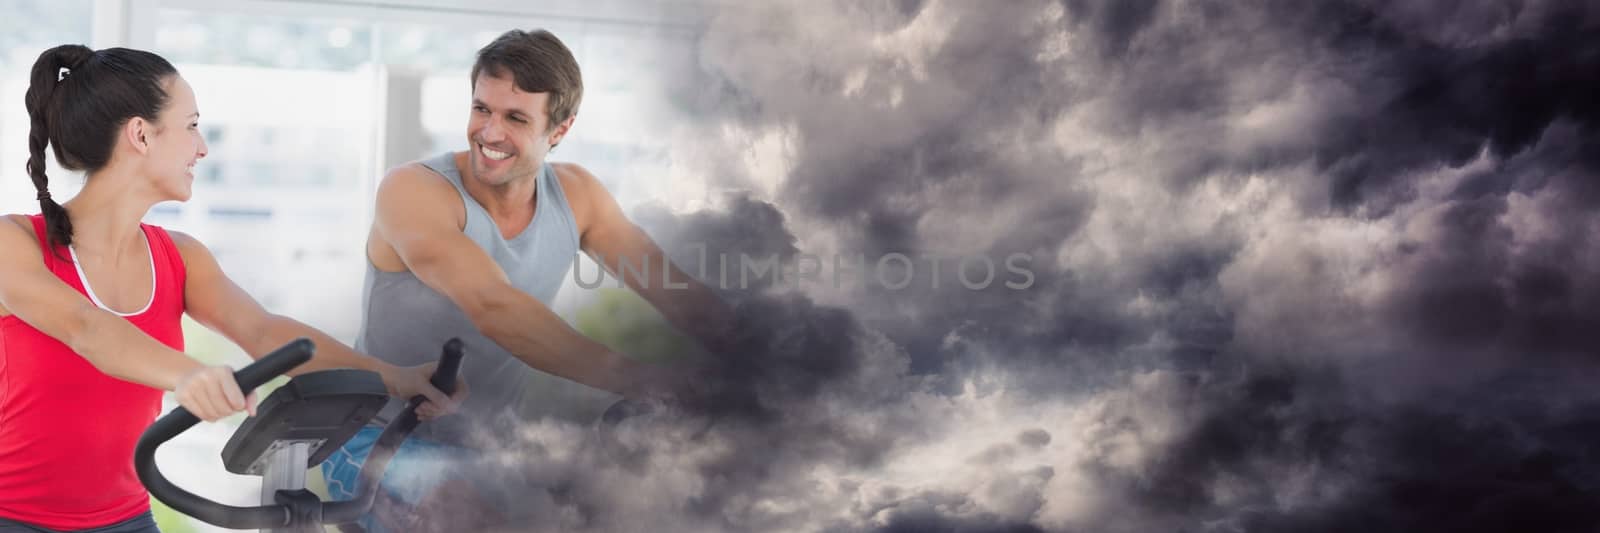 Digital composite of People smiling on gym bikes with stormy cloud transition